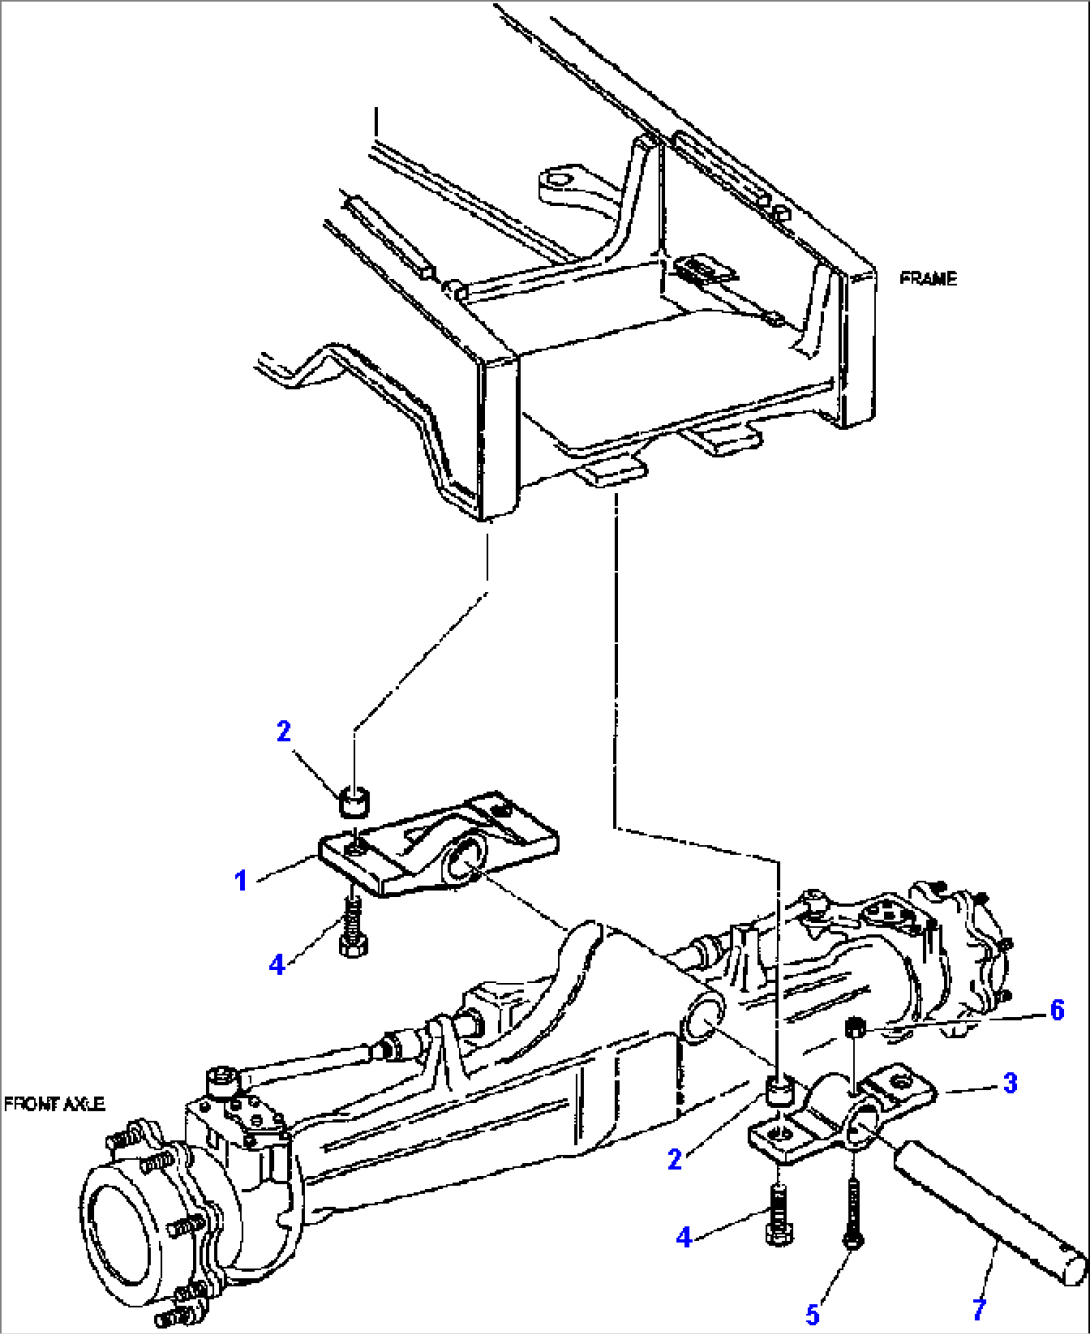 FIG. F3205-01A0 FRONT AXLE MOUNTING - 2WD